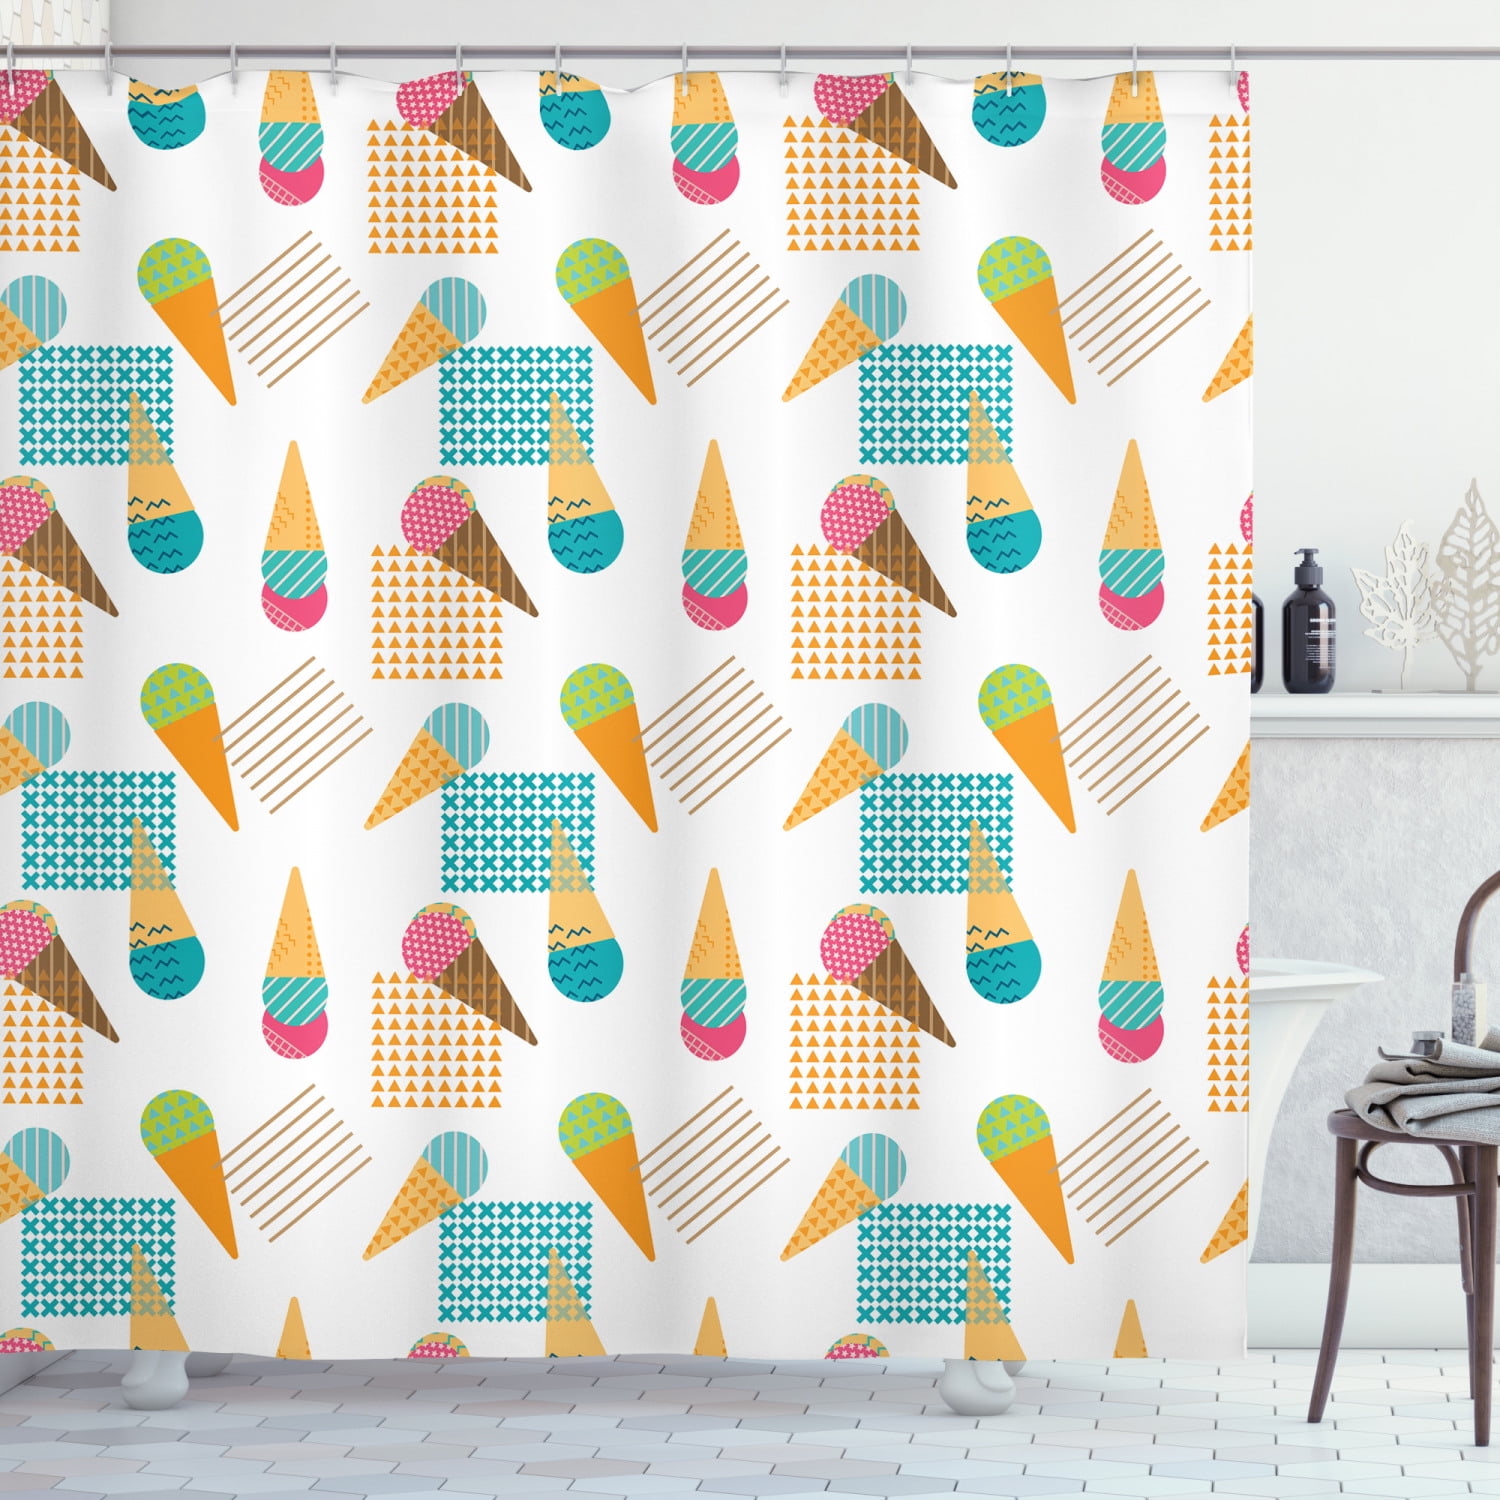 Details about   Sweet Ice Cream Pattern Shower Curtain Fabric Decor Set with Hooks 4 Sizes 